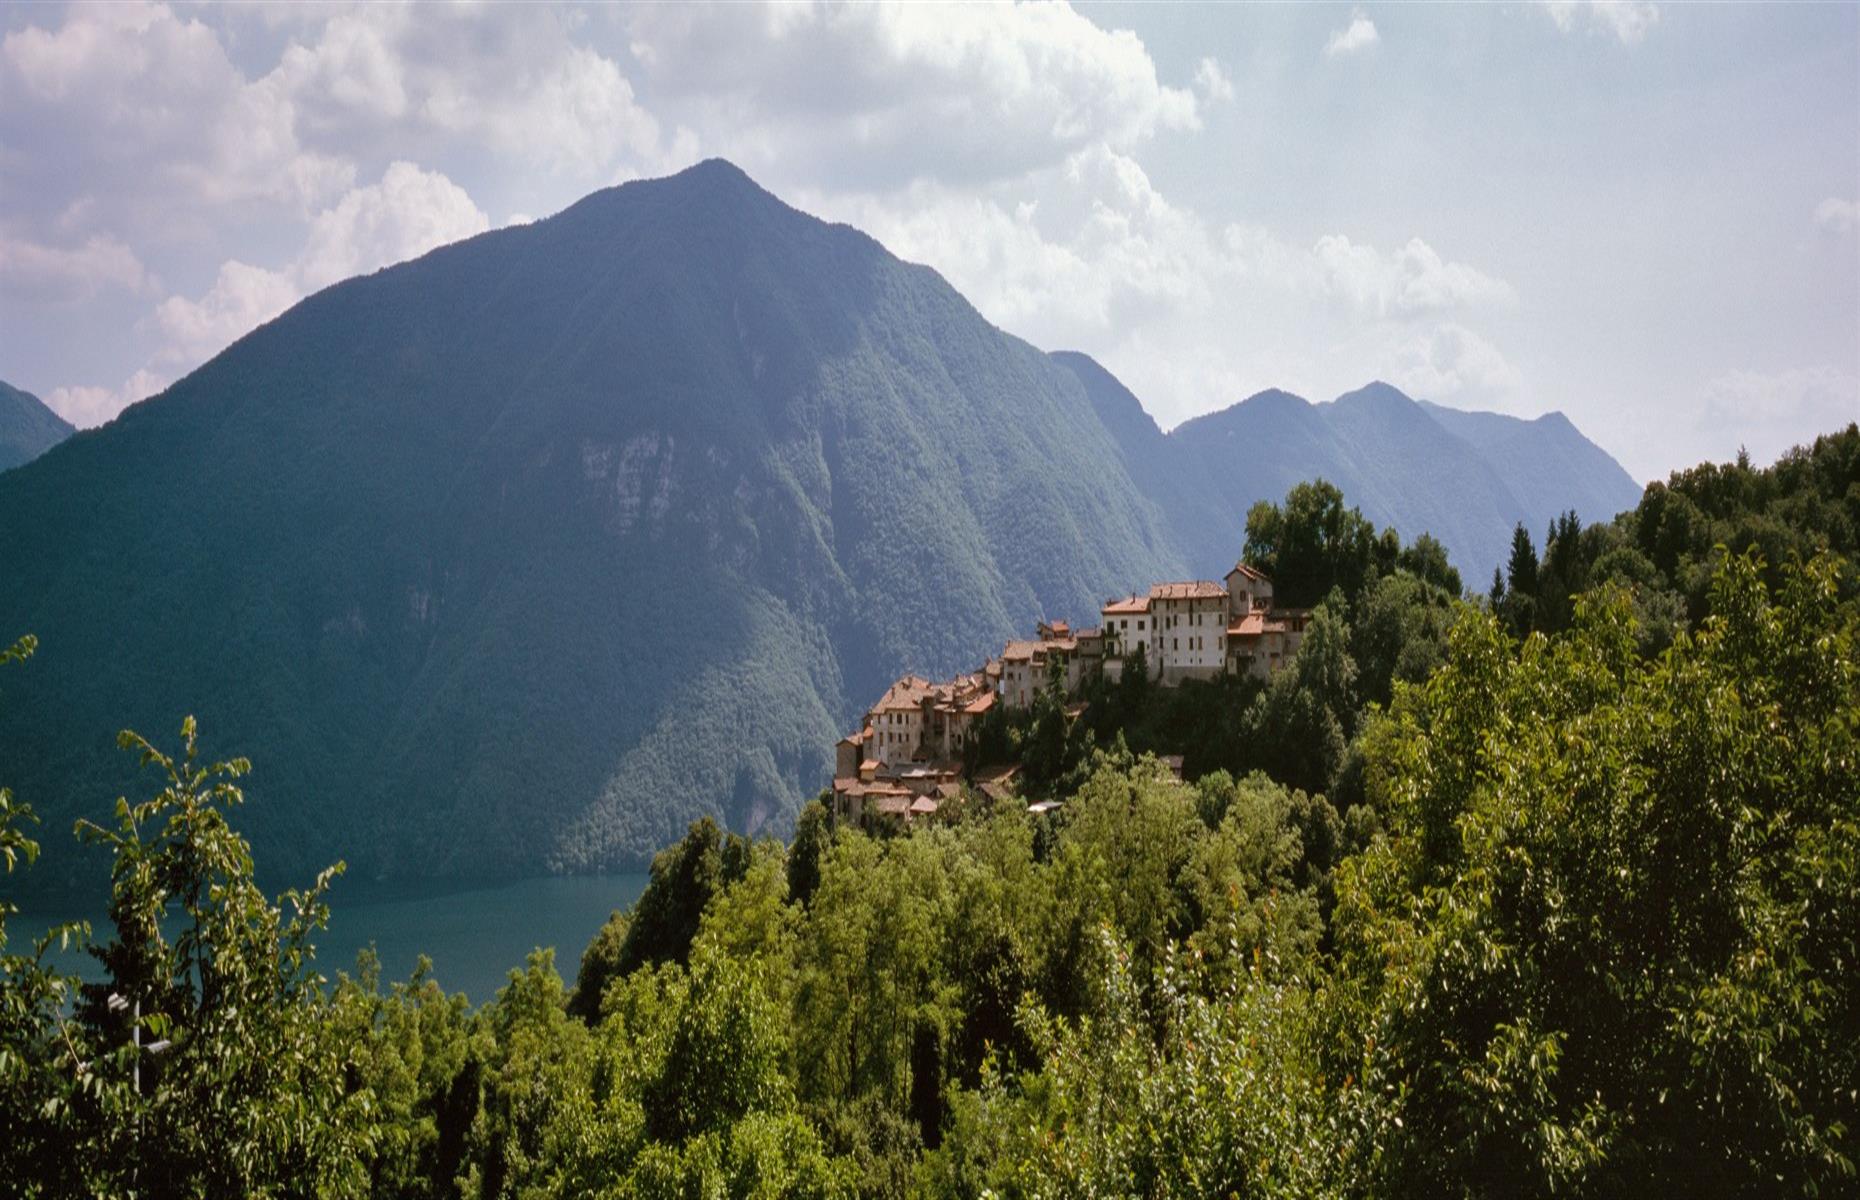 Beginning from the village of Dasio, you’ll pass through remote farms, then dense forests of pine and birch and maybe even spot a waterfall or two. When you reach the top, the views of Lake Lugano are enough to take your breath away. On your way down to the lakefront for an evening spritz to cool off, stop in the car-free village of Castello to breathe in the quiet and fresh air.